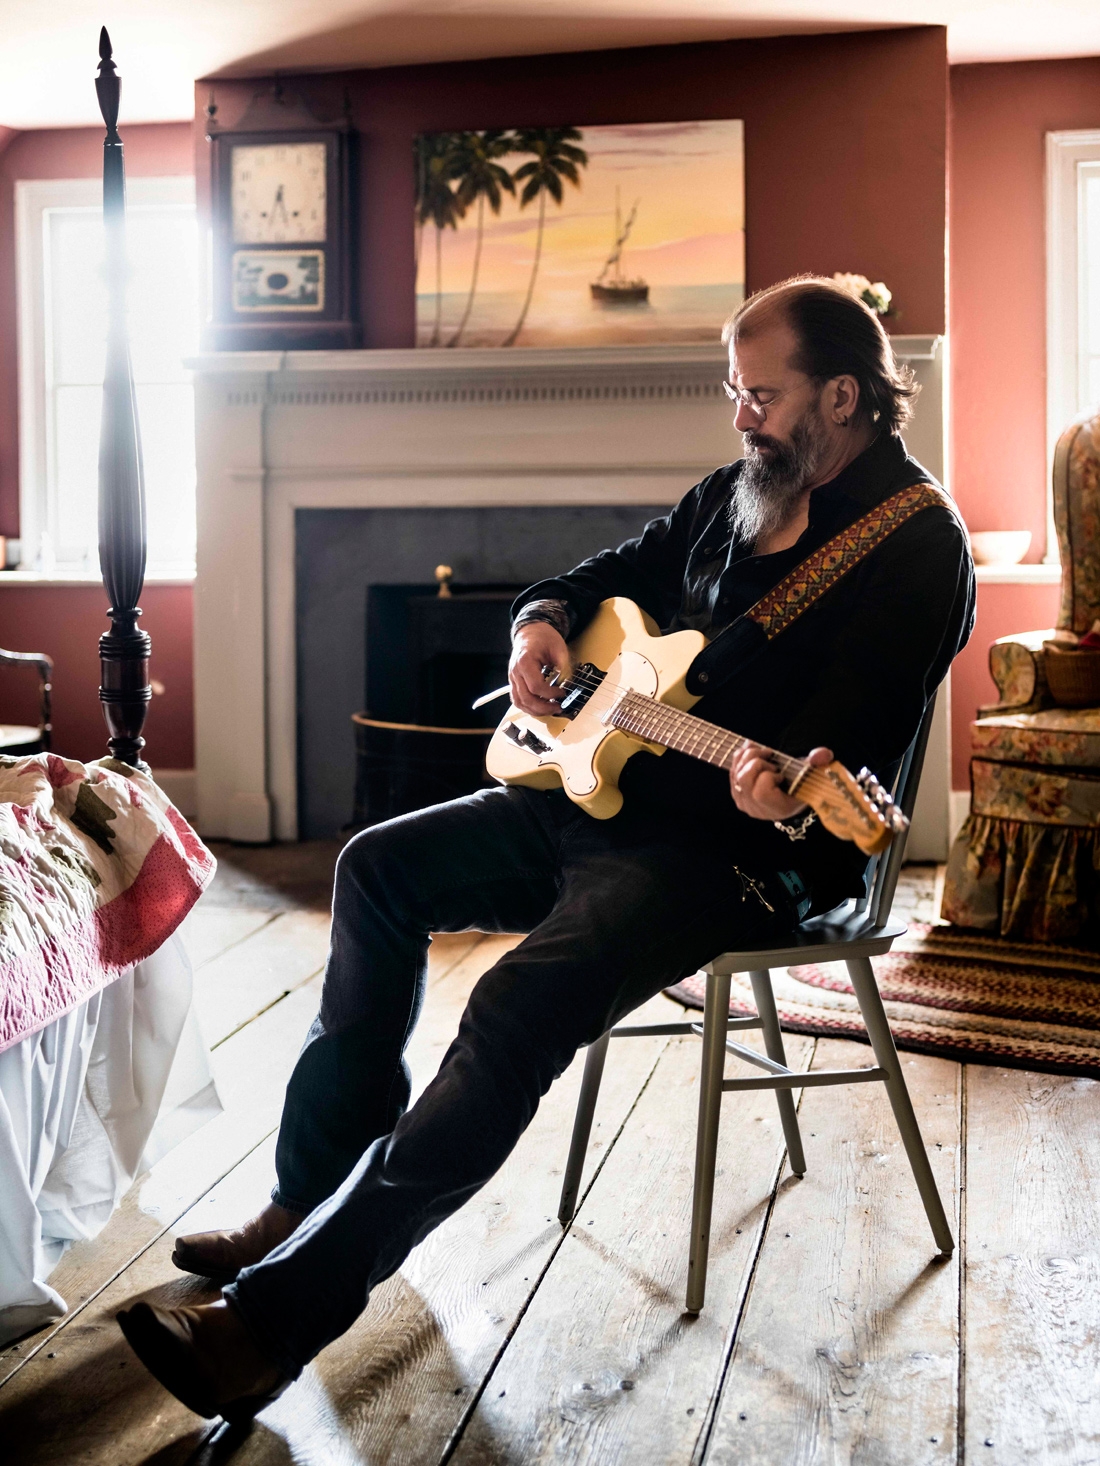 An Outlaw Comes Back To Country: Steve Earle talks guitars, Nashville and his audience